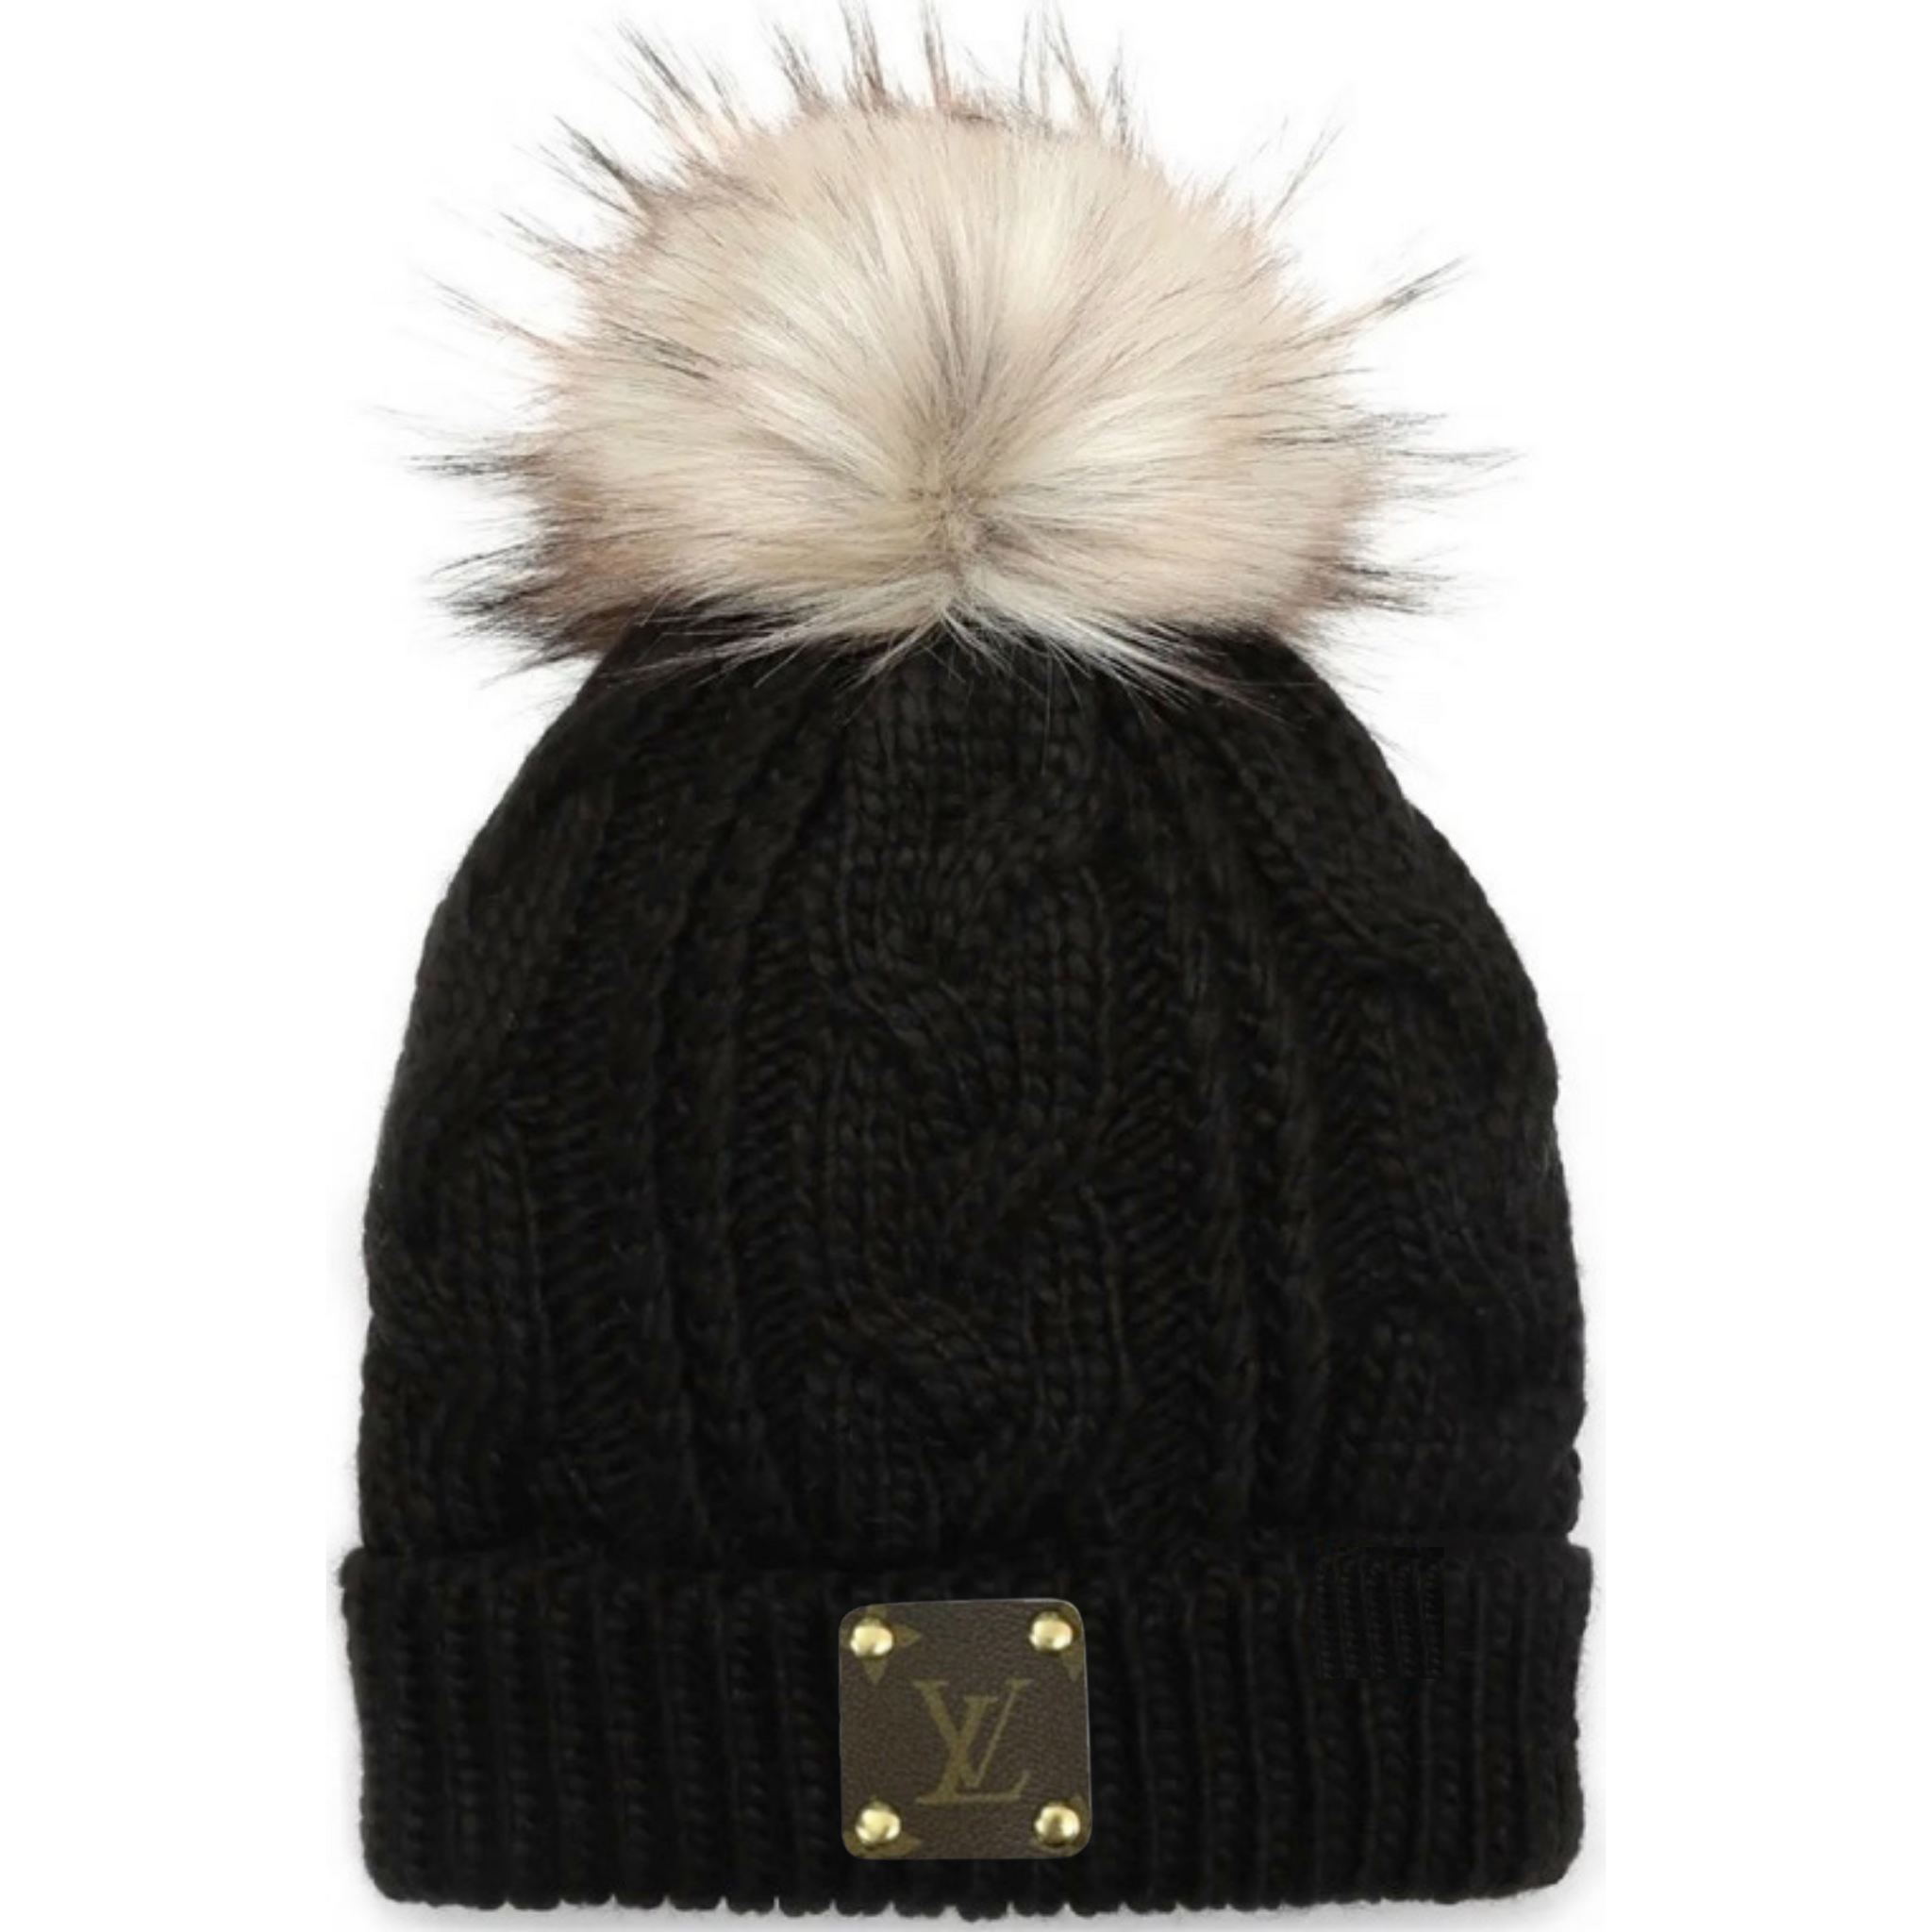 Upcycled Black/Tan Pom Beanie with Sherpa Lining